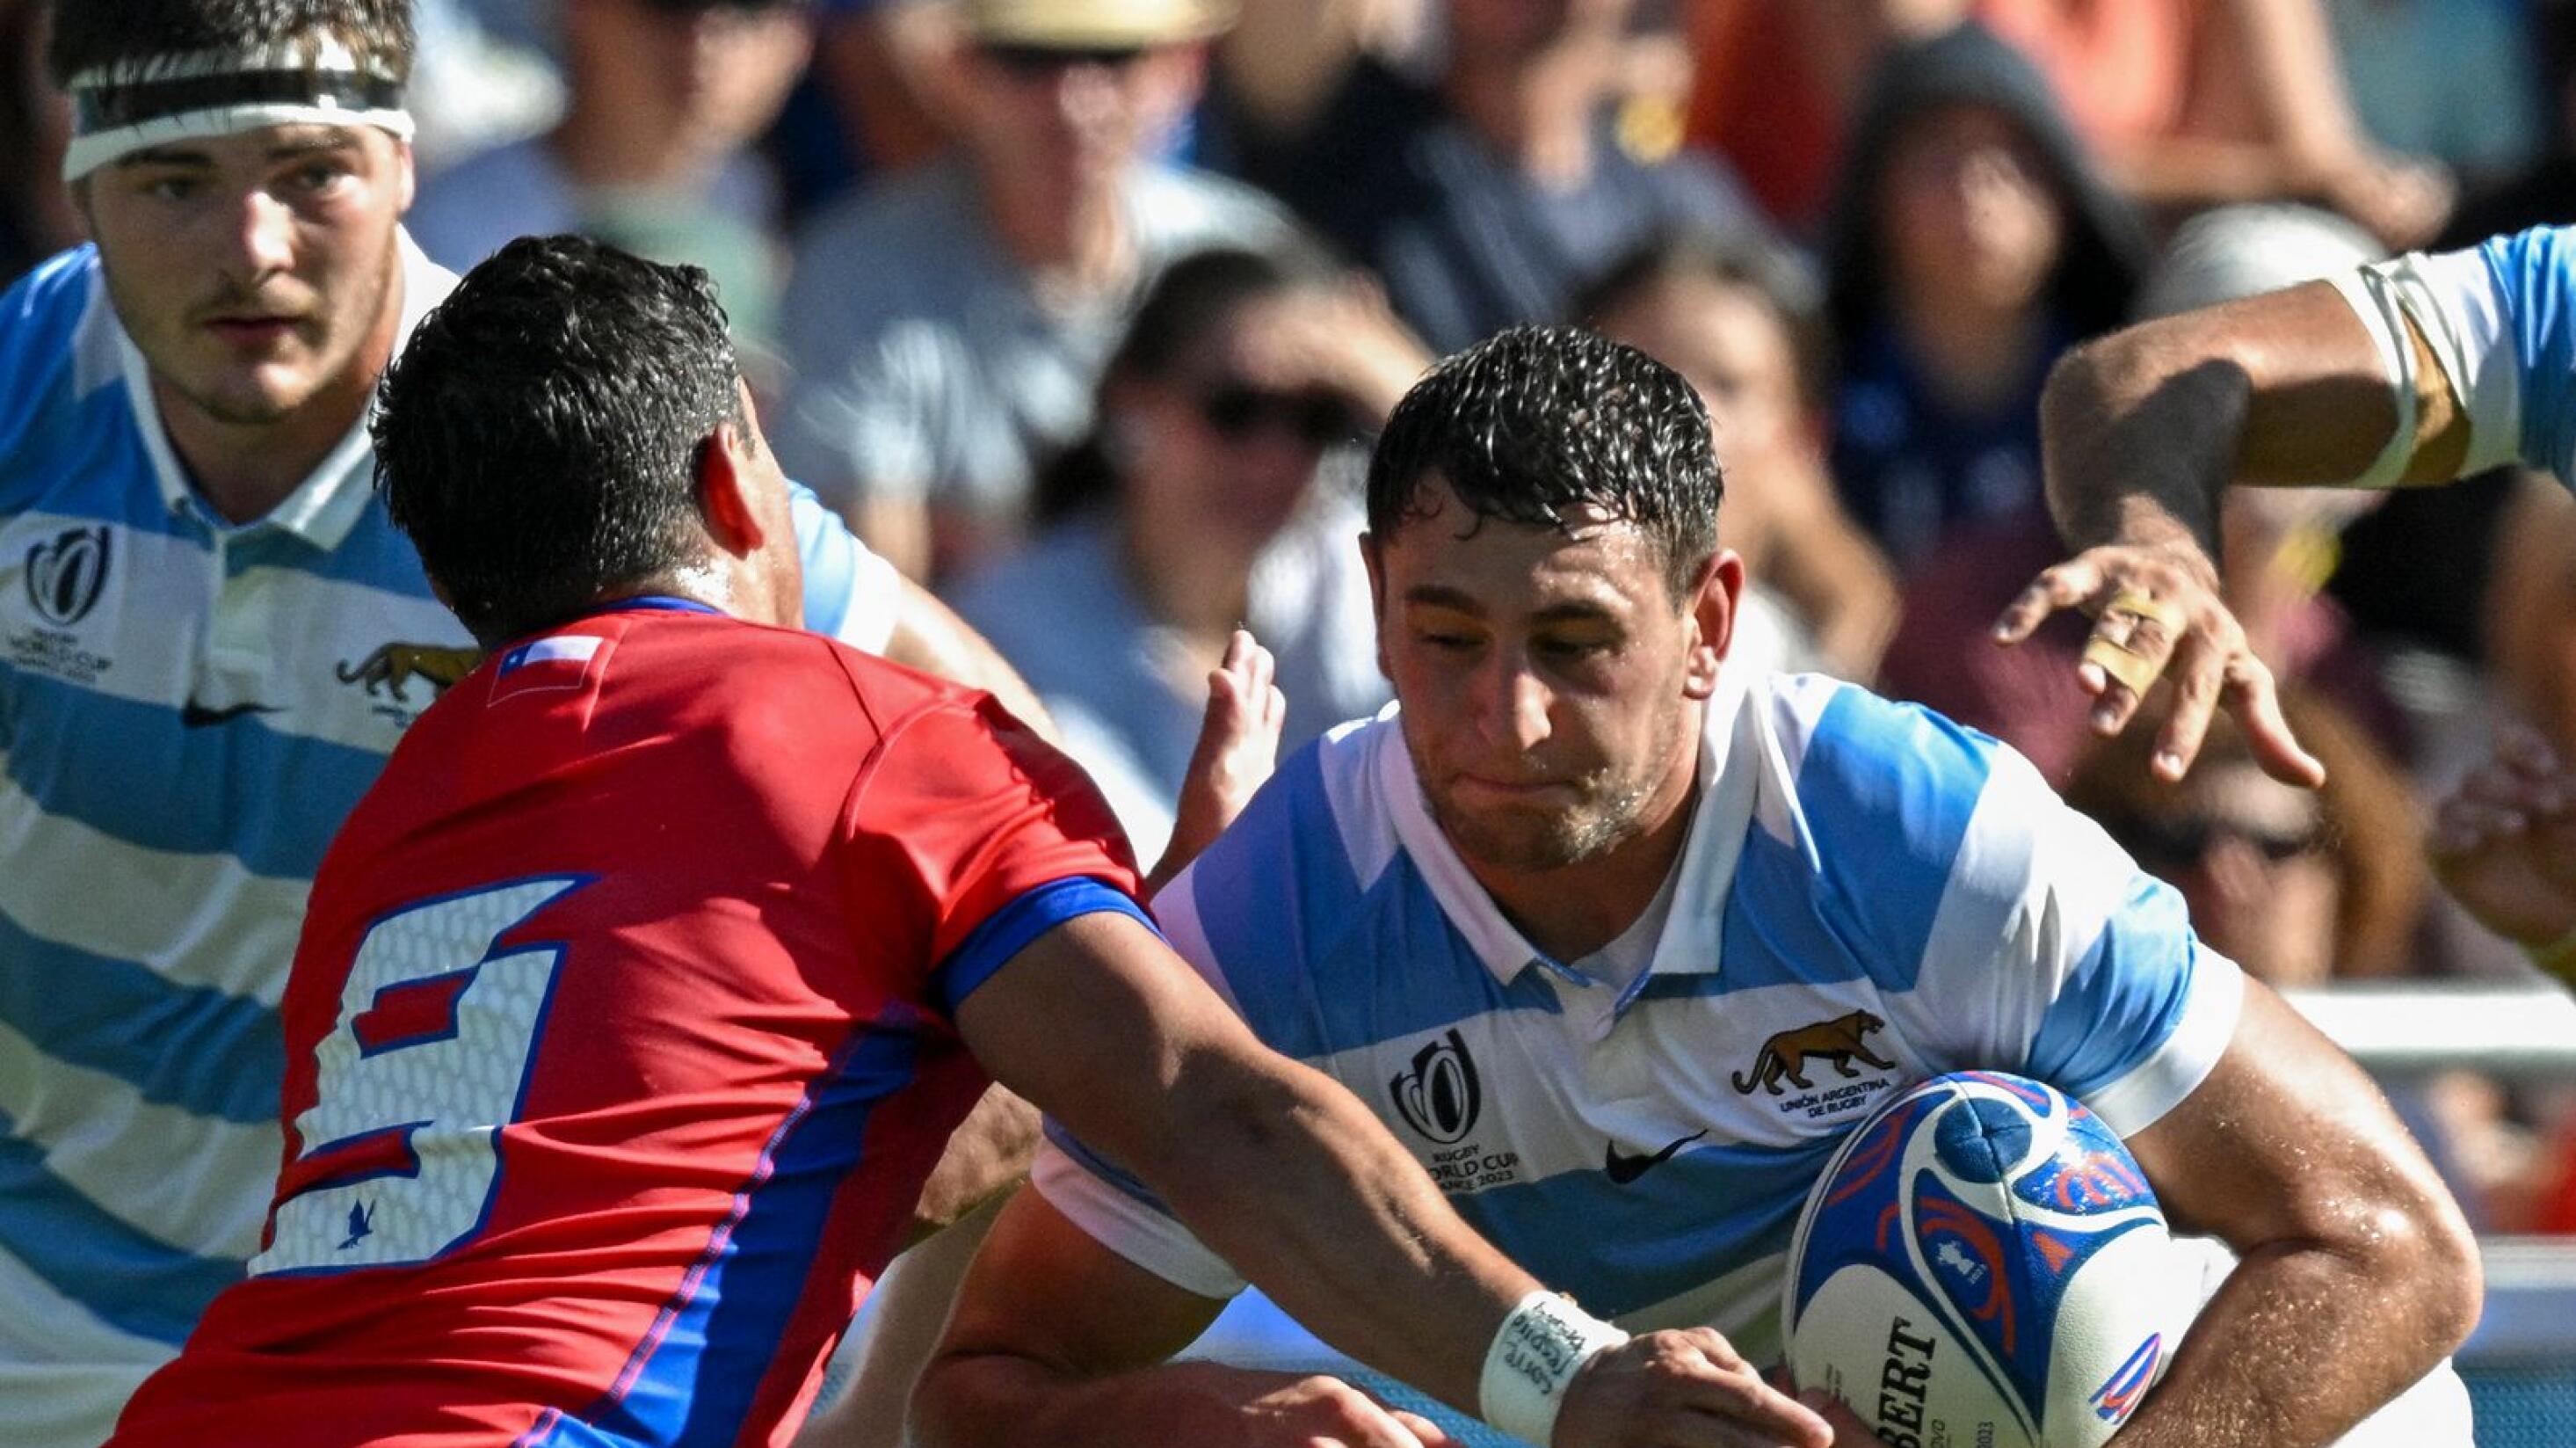 Chile's scrumhalf Marcelo Torrealba and Argentina's Tomas Cubelli fight for the ball during their Rugby World Cup Pool D match